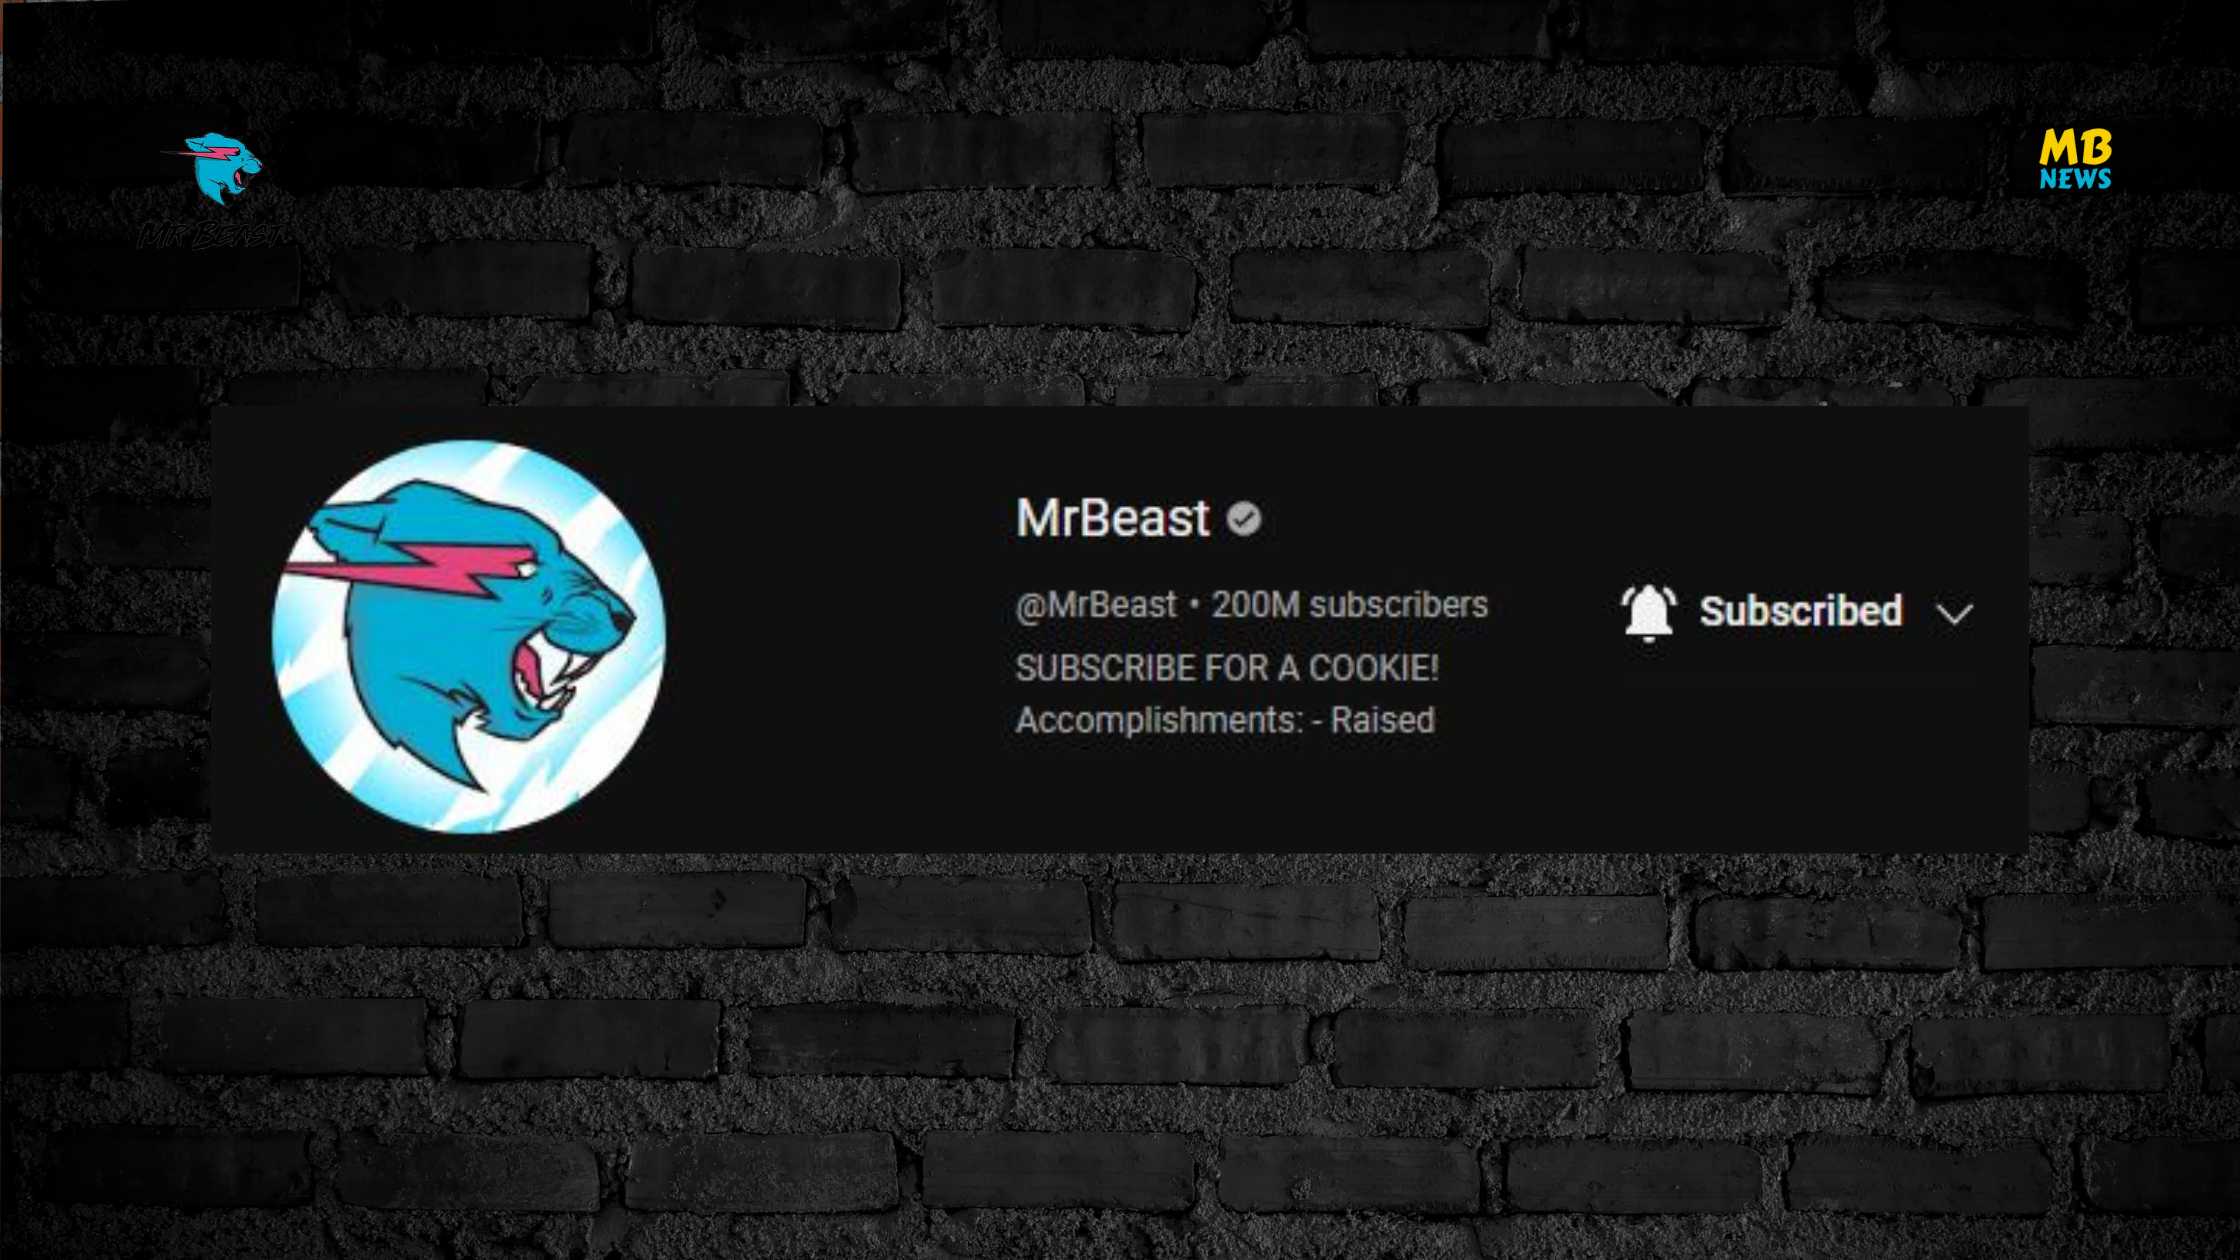 MrBeast Makes YouTube History: Second Channel to Reach 200 Million Subscribers!